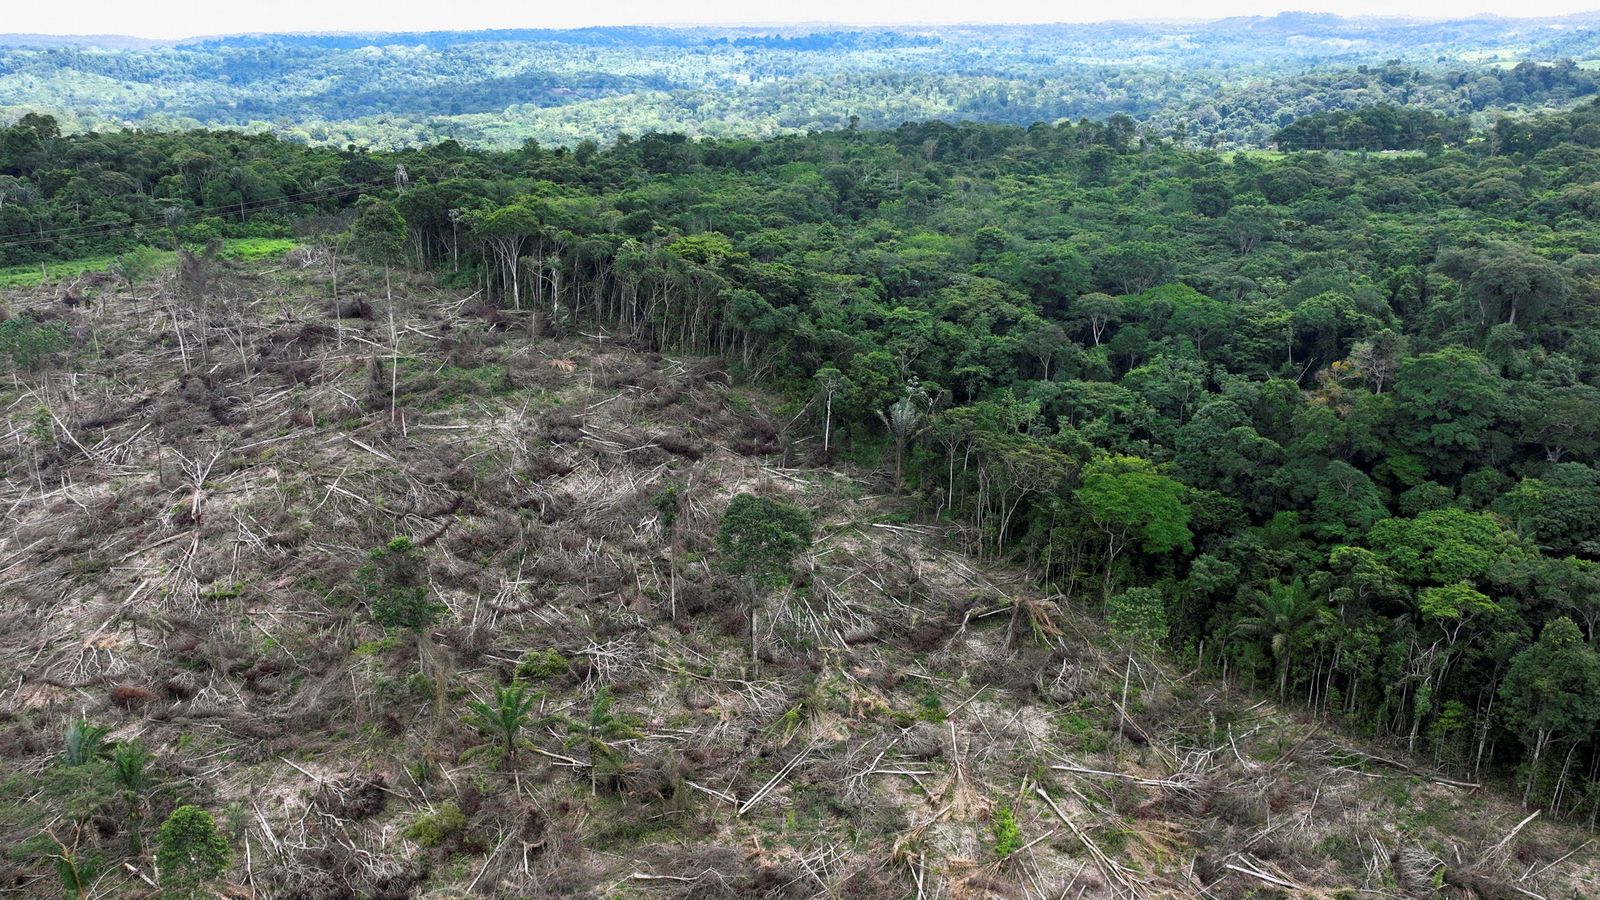 Deforestation report: UK's 'unsustainable' consumption putting 'enormous pressure' on world's forests, MPs warn